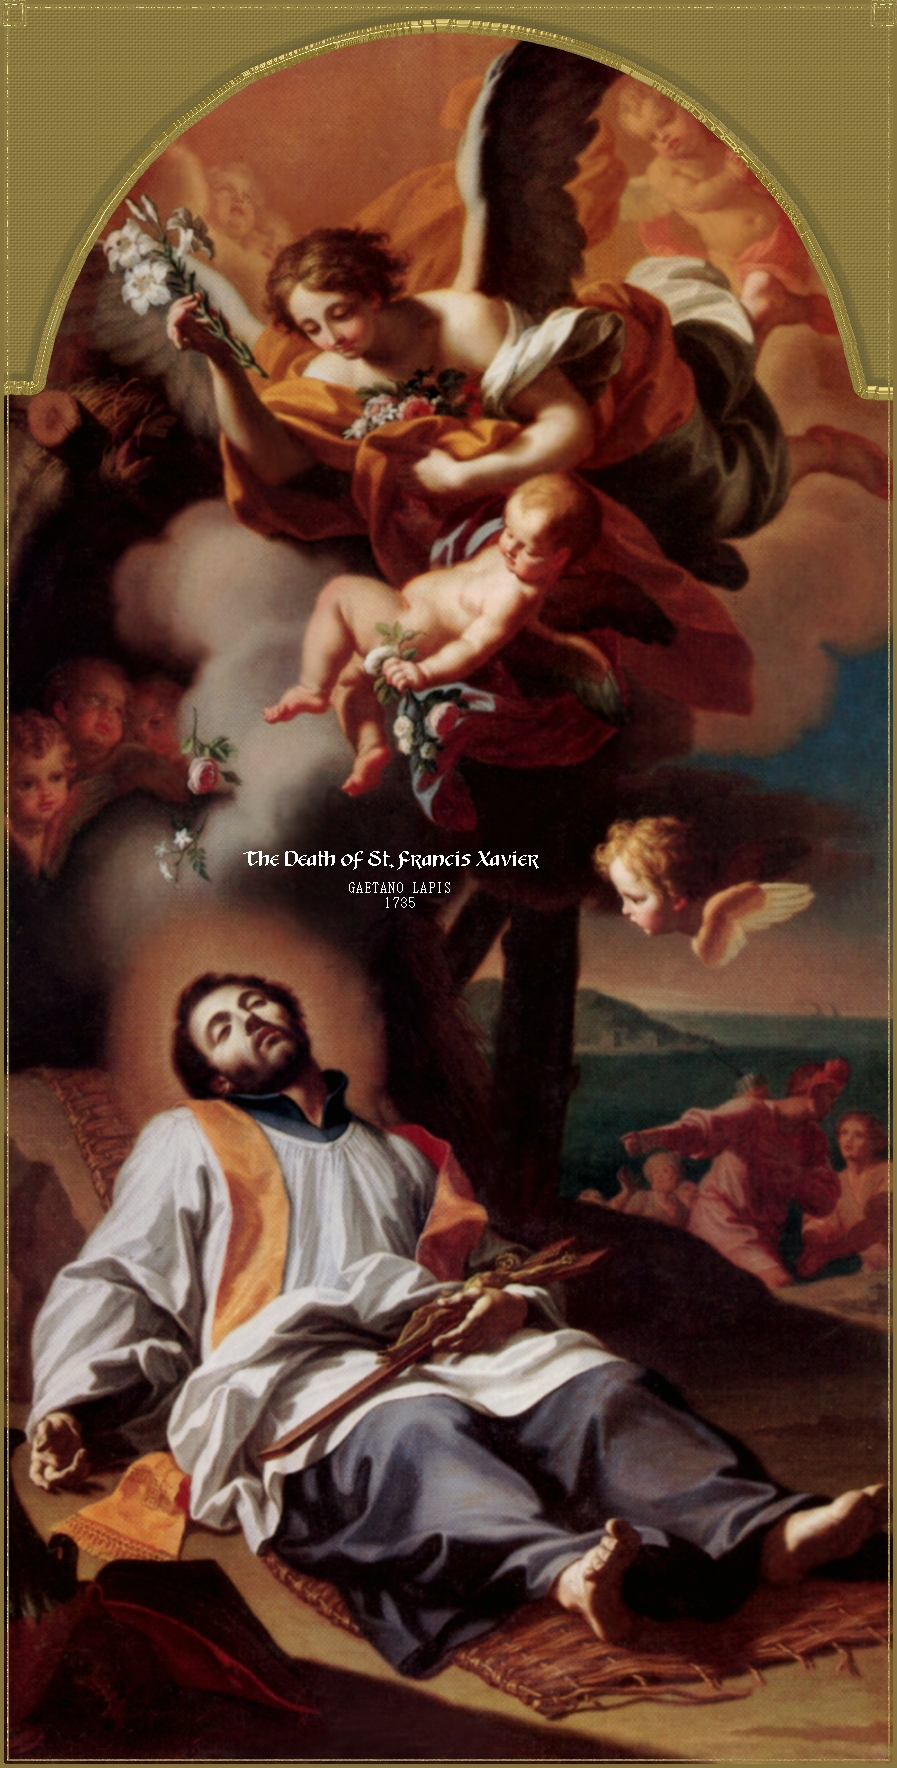 THE DEATH OF ST. FRANCIS XAVIER